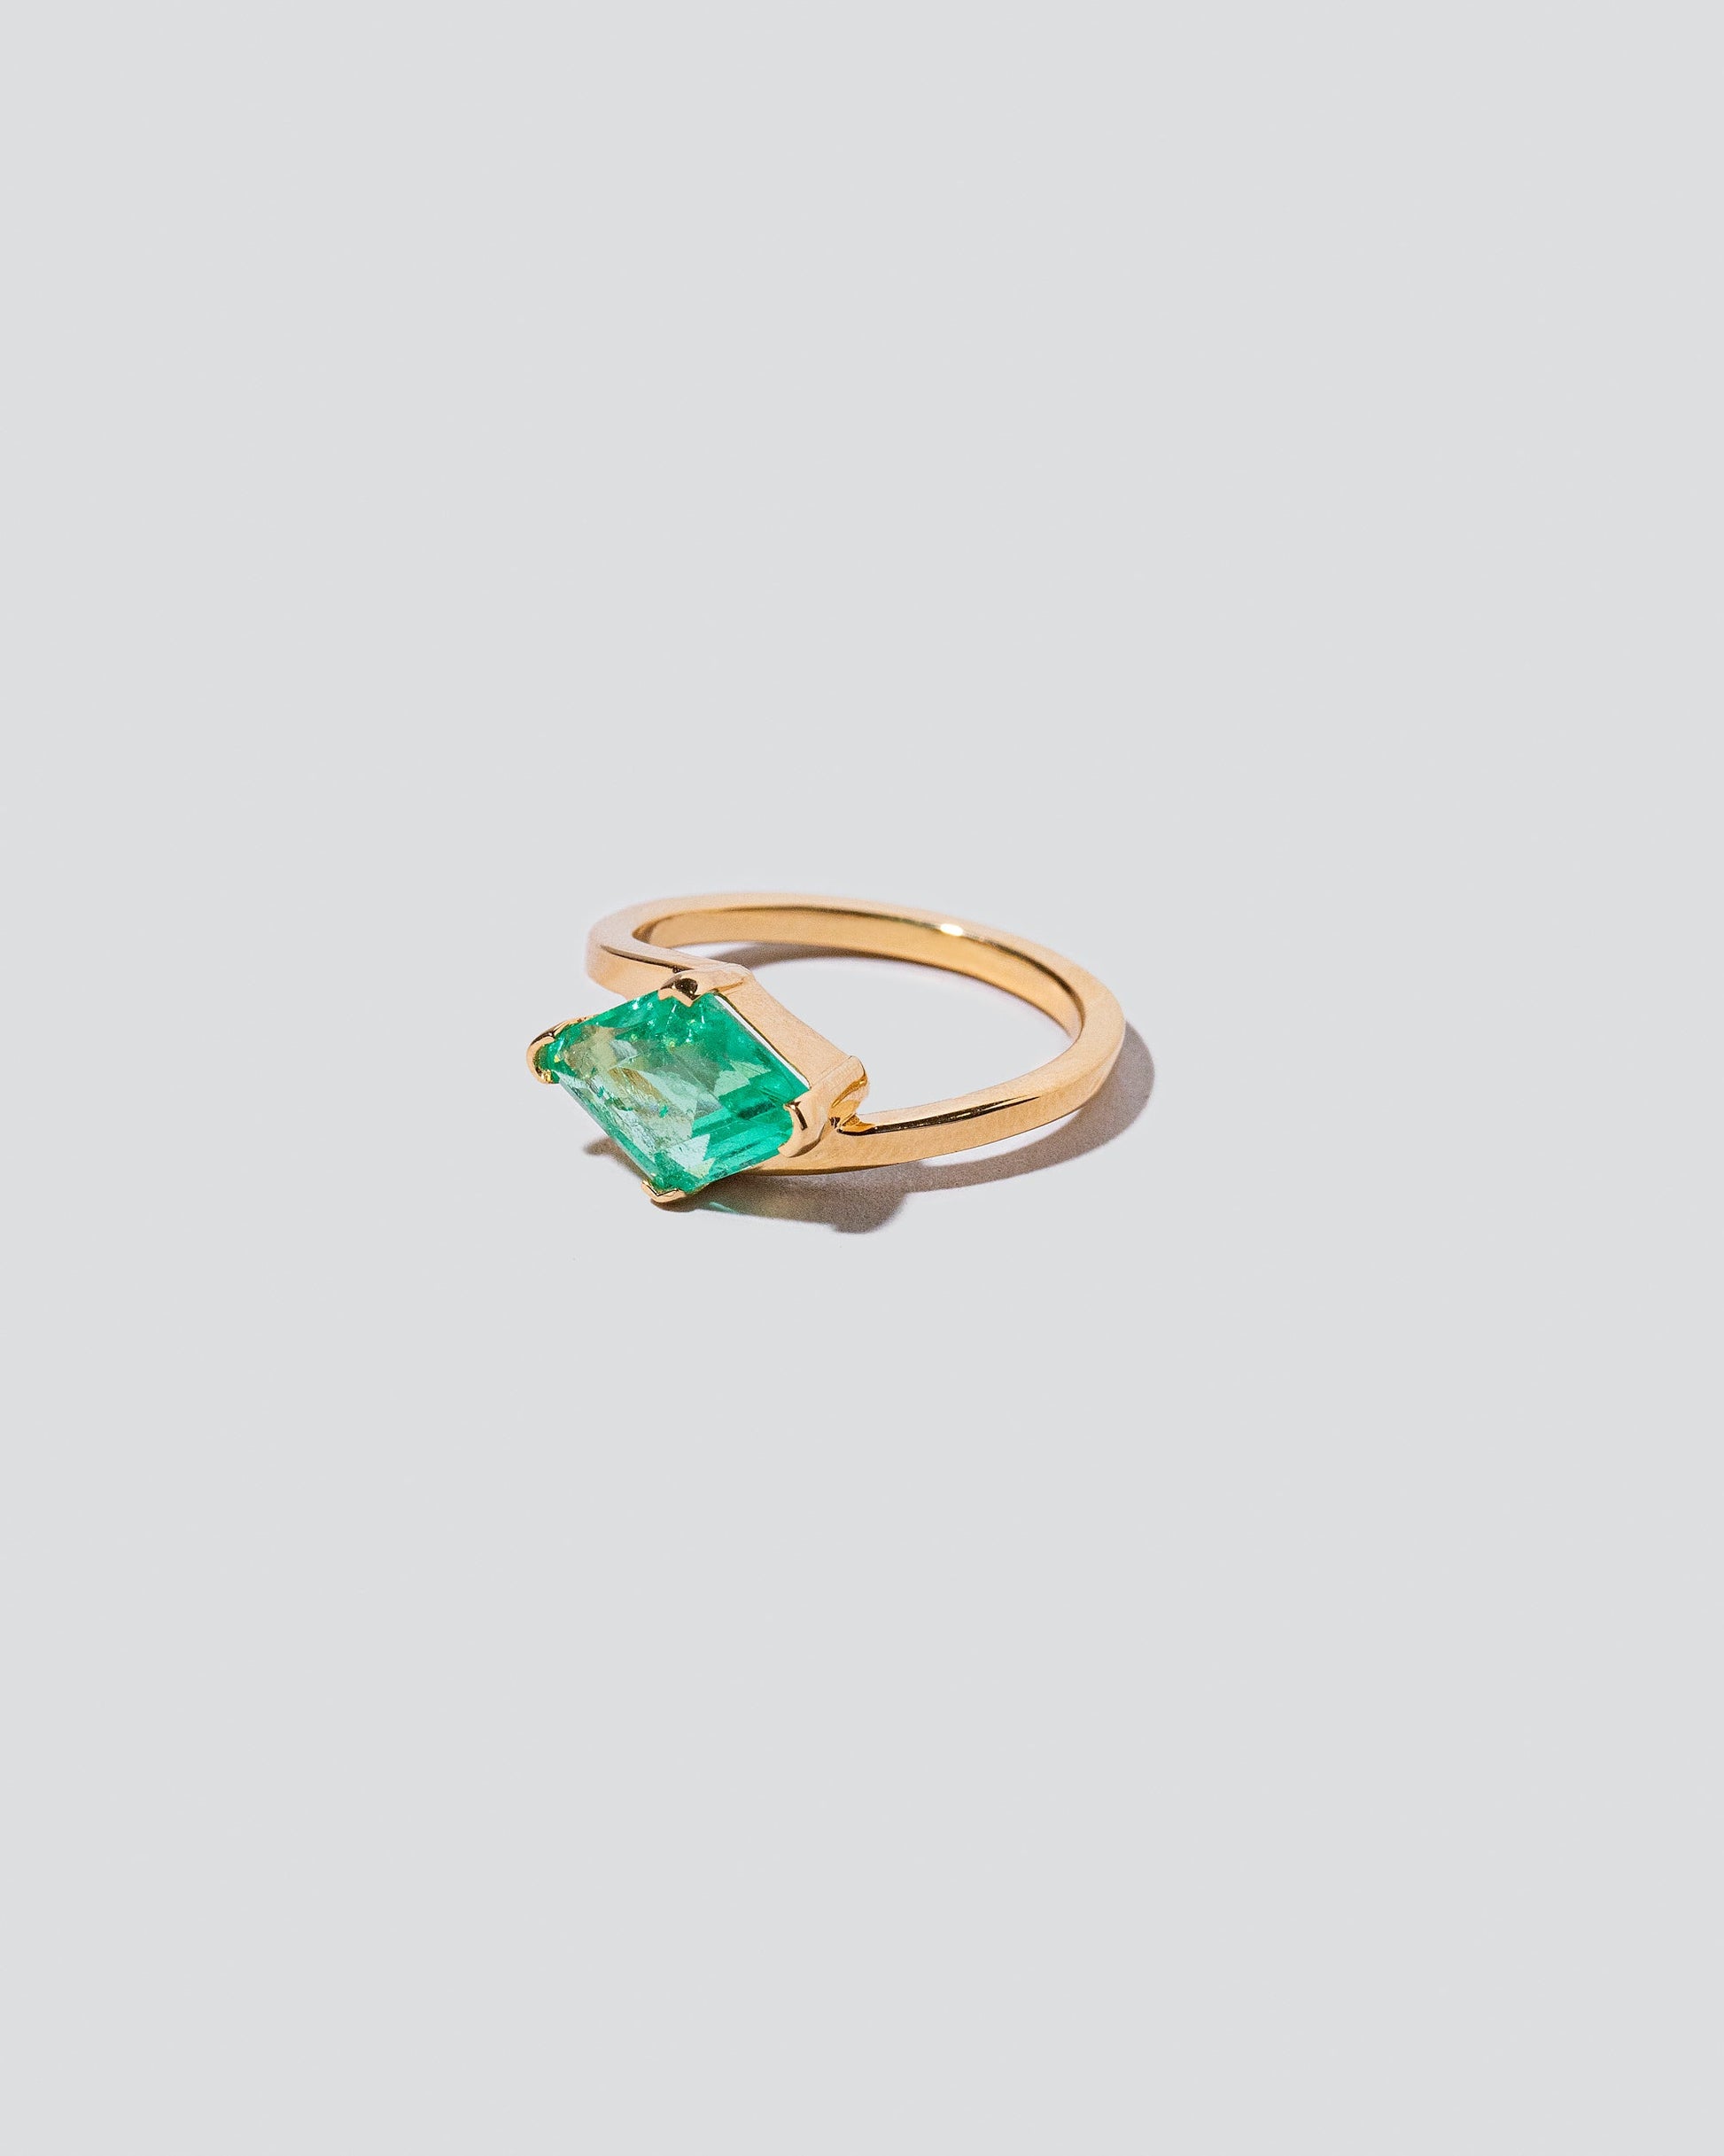 Product photo of Anthias Ring on a light color background 